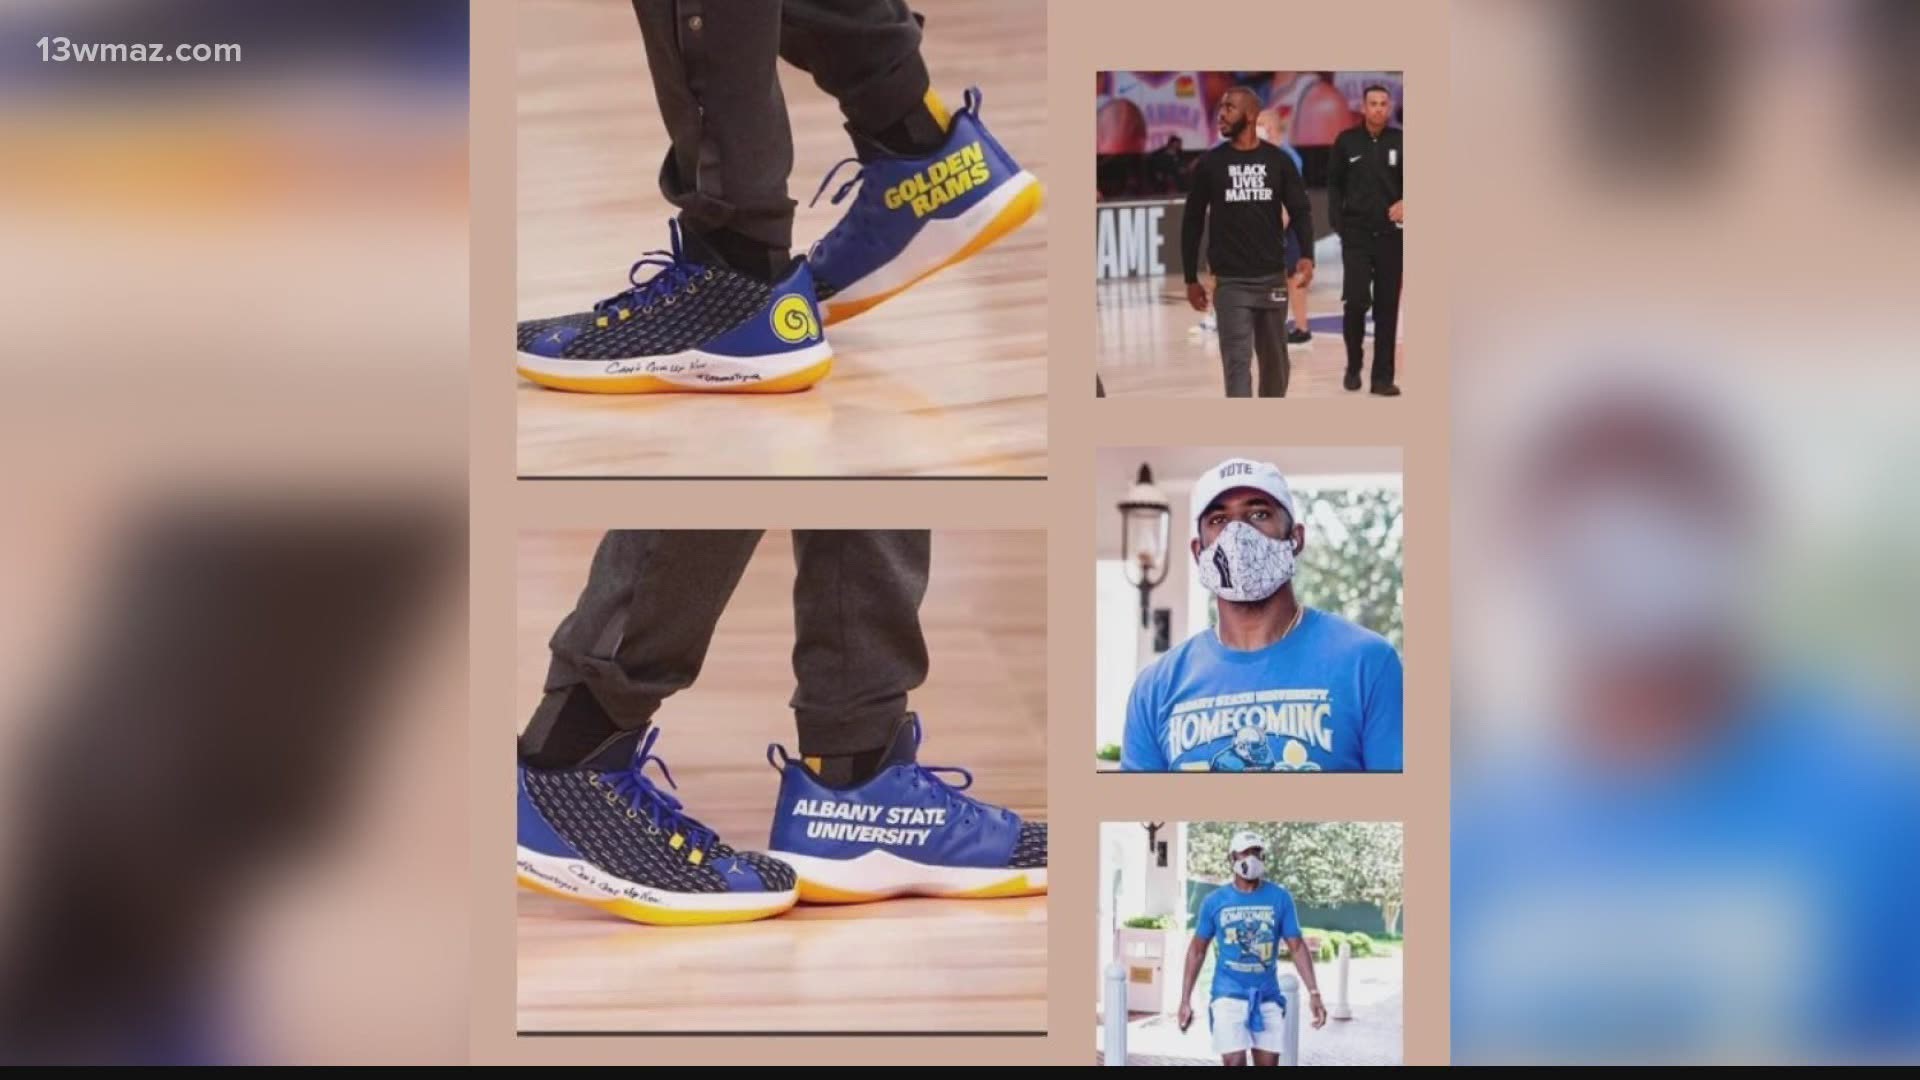 NBA All Star and activist, Oklahoma City's Chris Paul also known as CP3 donned a pair of sneakers highlighting Albany State University